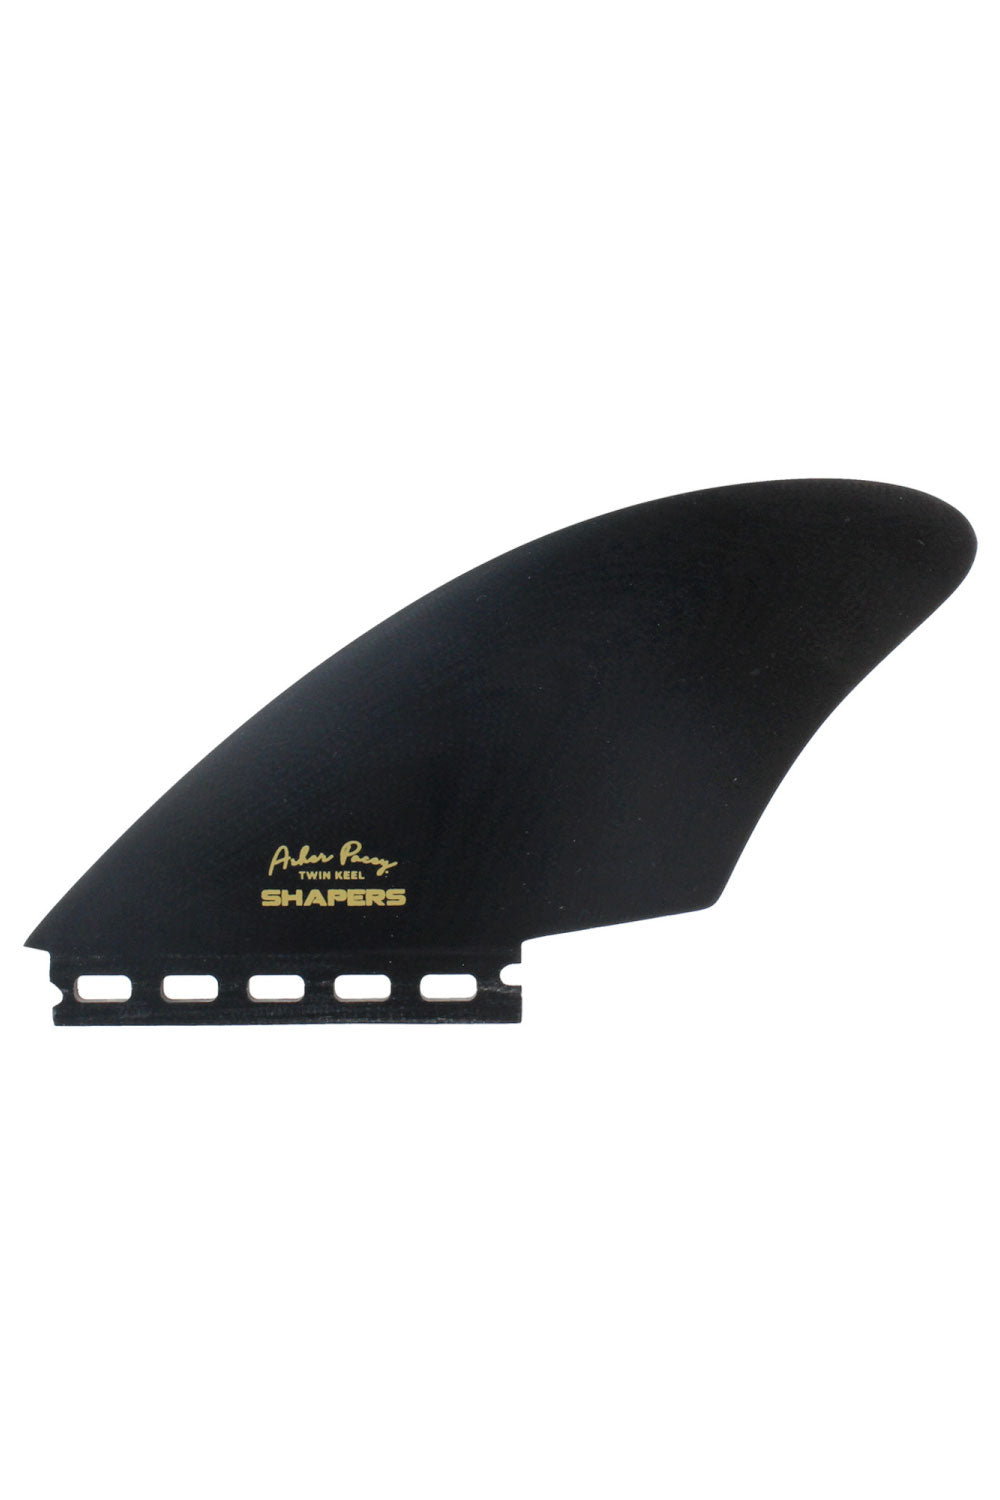 Shapers Asher Pacey Keel Twin Fin Set